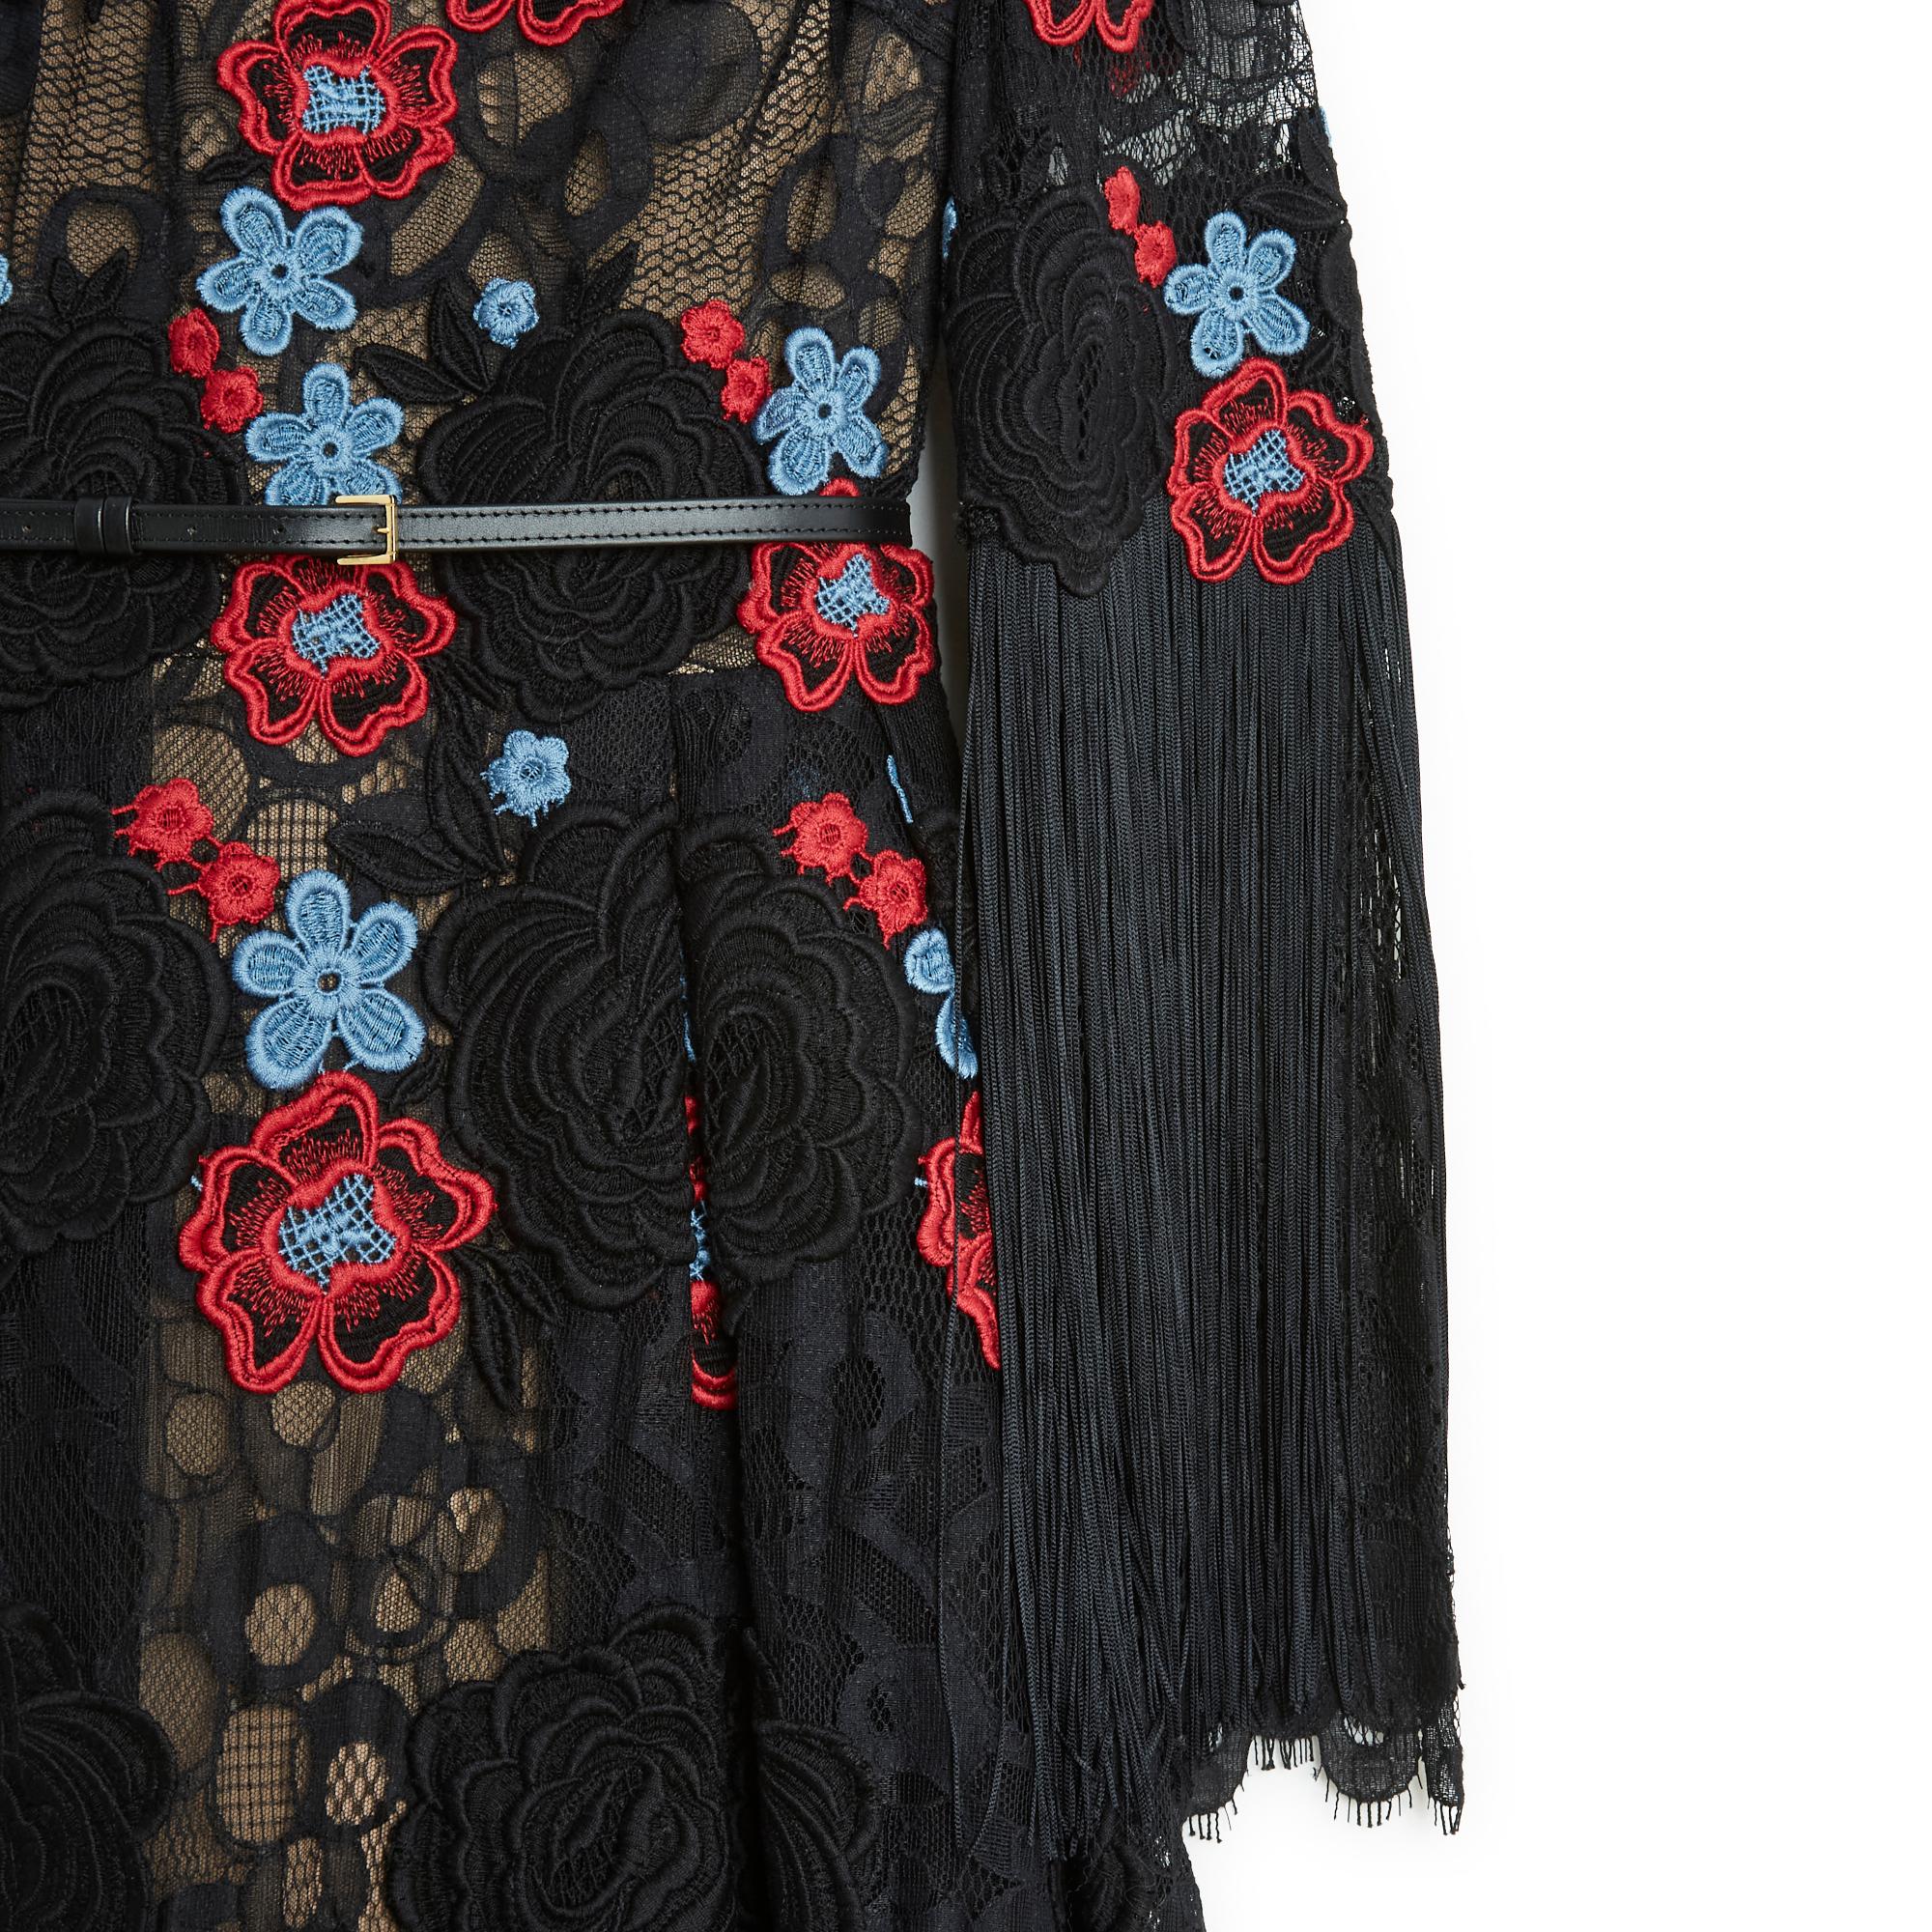 Elie Saab short dress AW2016 collection in black lace embroidered with red and blue flowers, round neck, long sleeves lined with fringe from the elbow, thin leather belt at the waist, skirt with large box pleats, flesh-colored silk crepe lining on